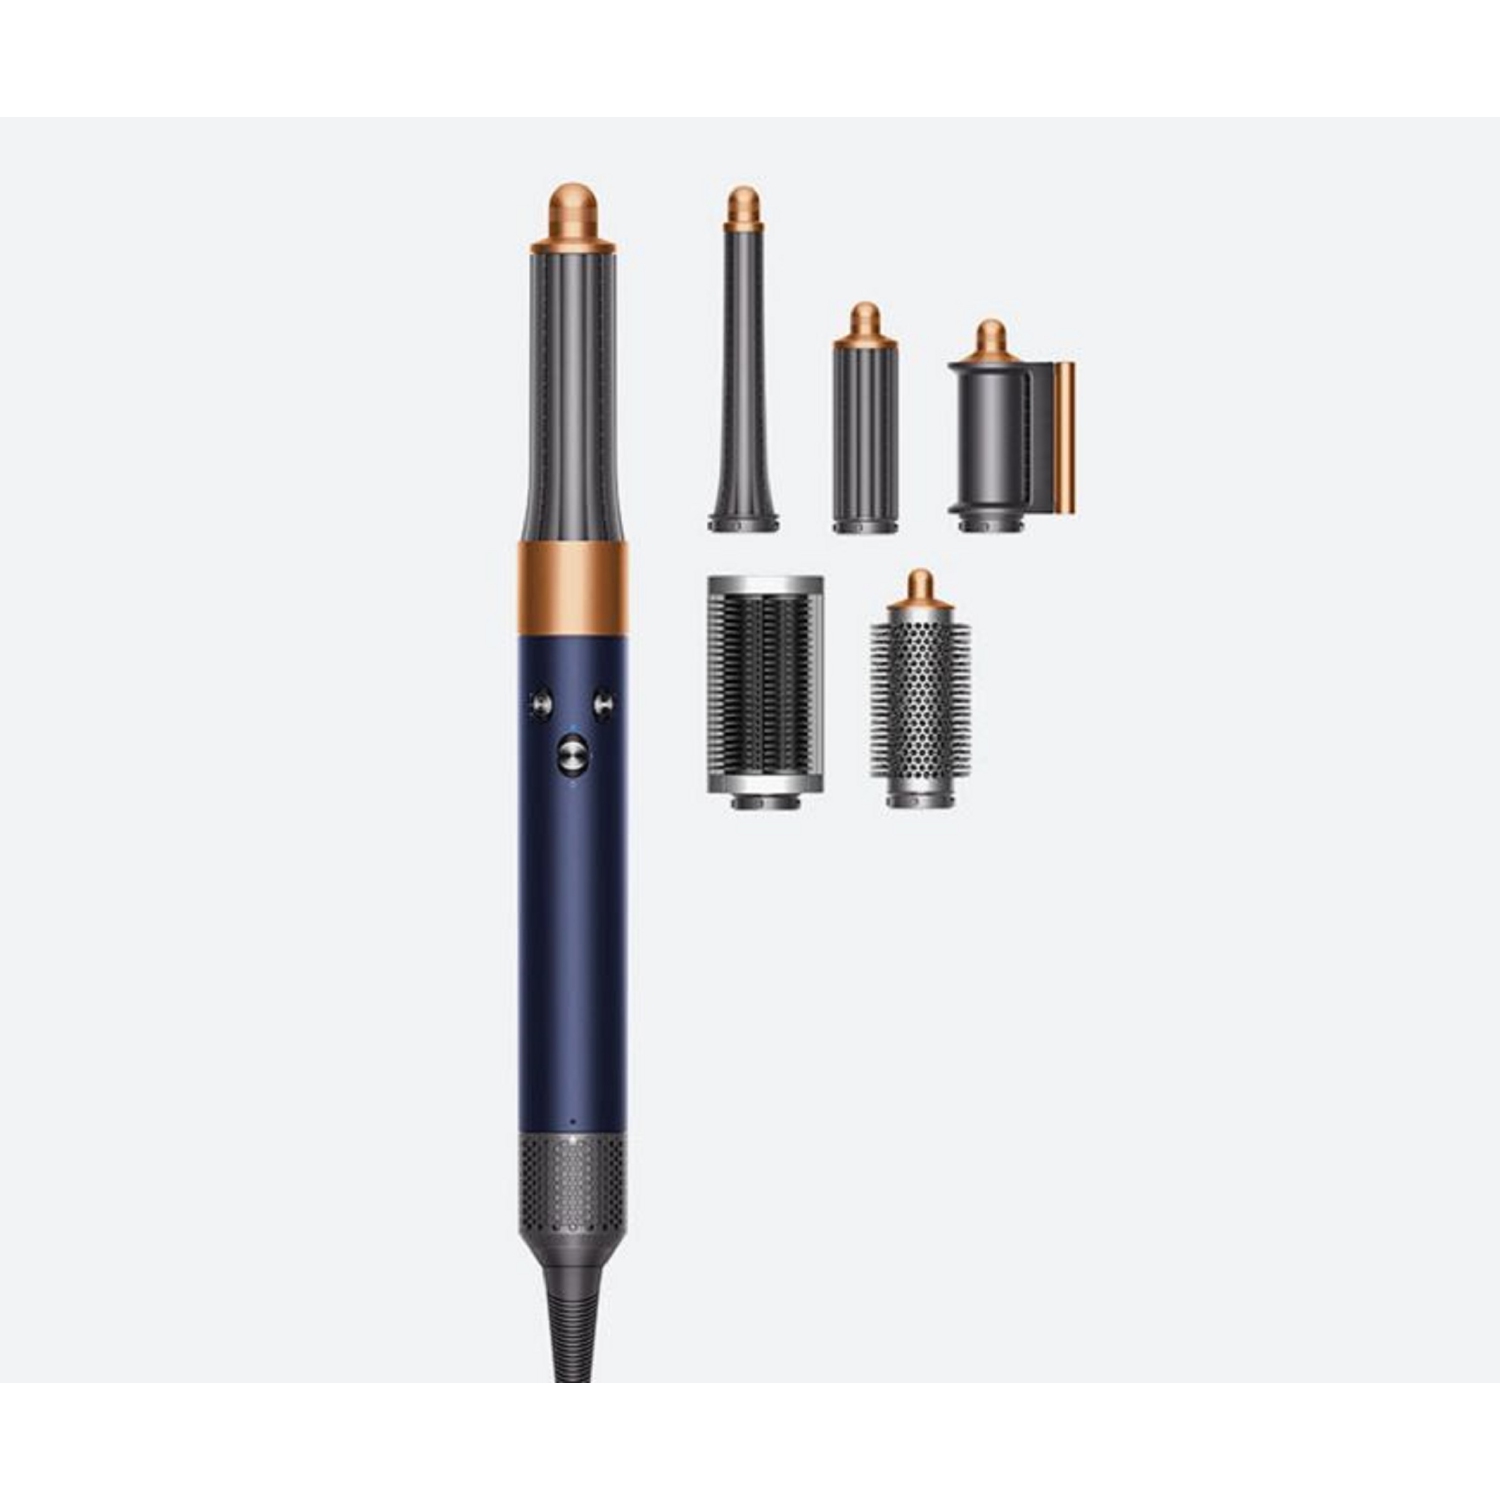 Dyson Second Generation Airwrap Multi-Styler, for Short and Coarse Hair, Blue/Copper